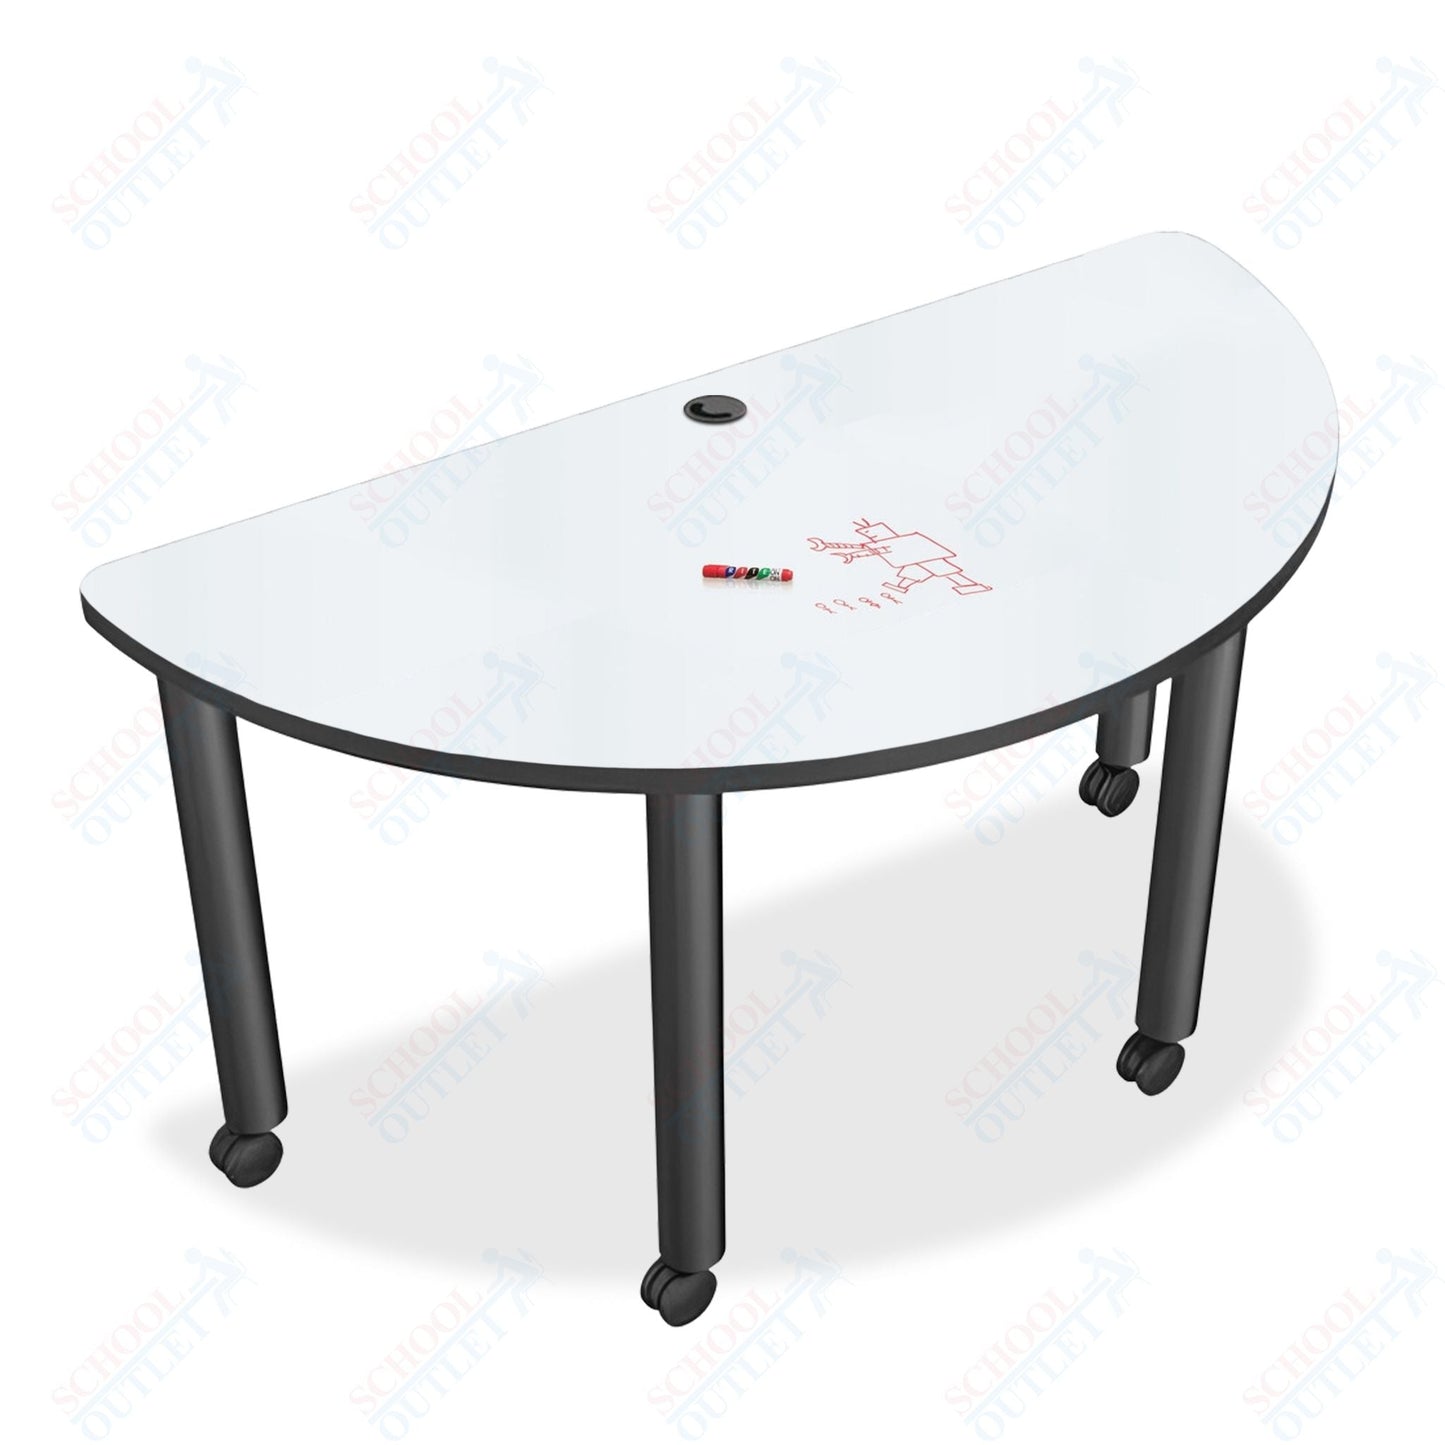 Mooreco Modular Conference Table - Half Round - 58"W x 29"D - Black Edgeband (Mooreco 27743) - SchoolOutlet